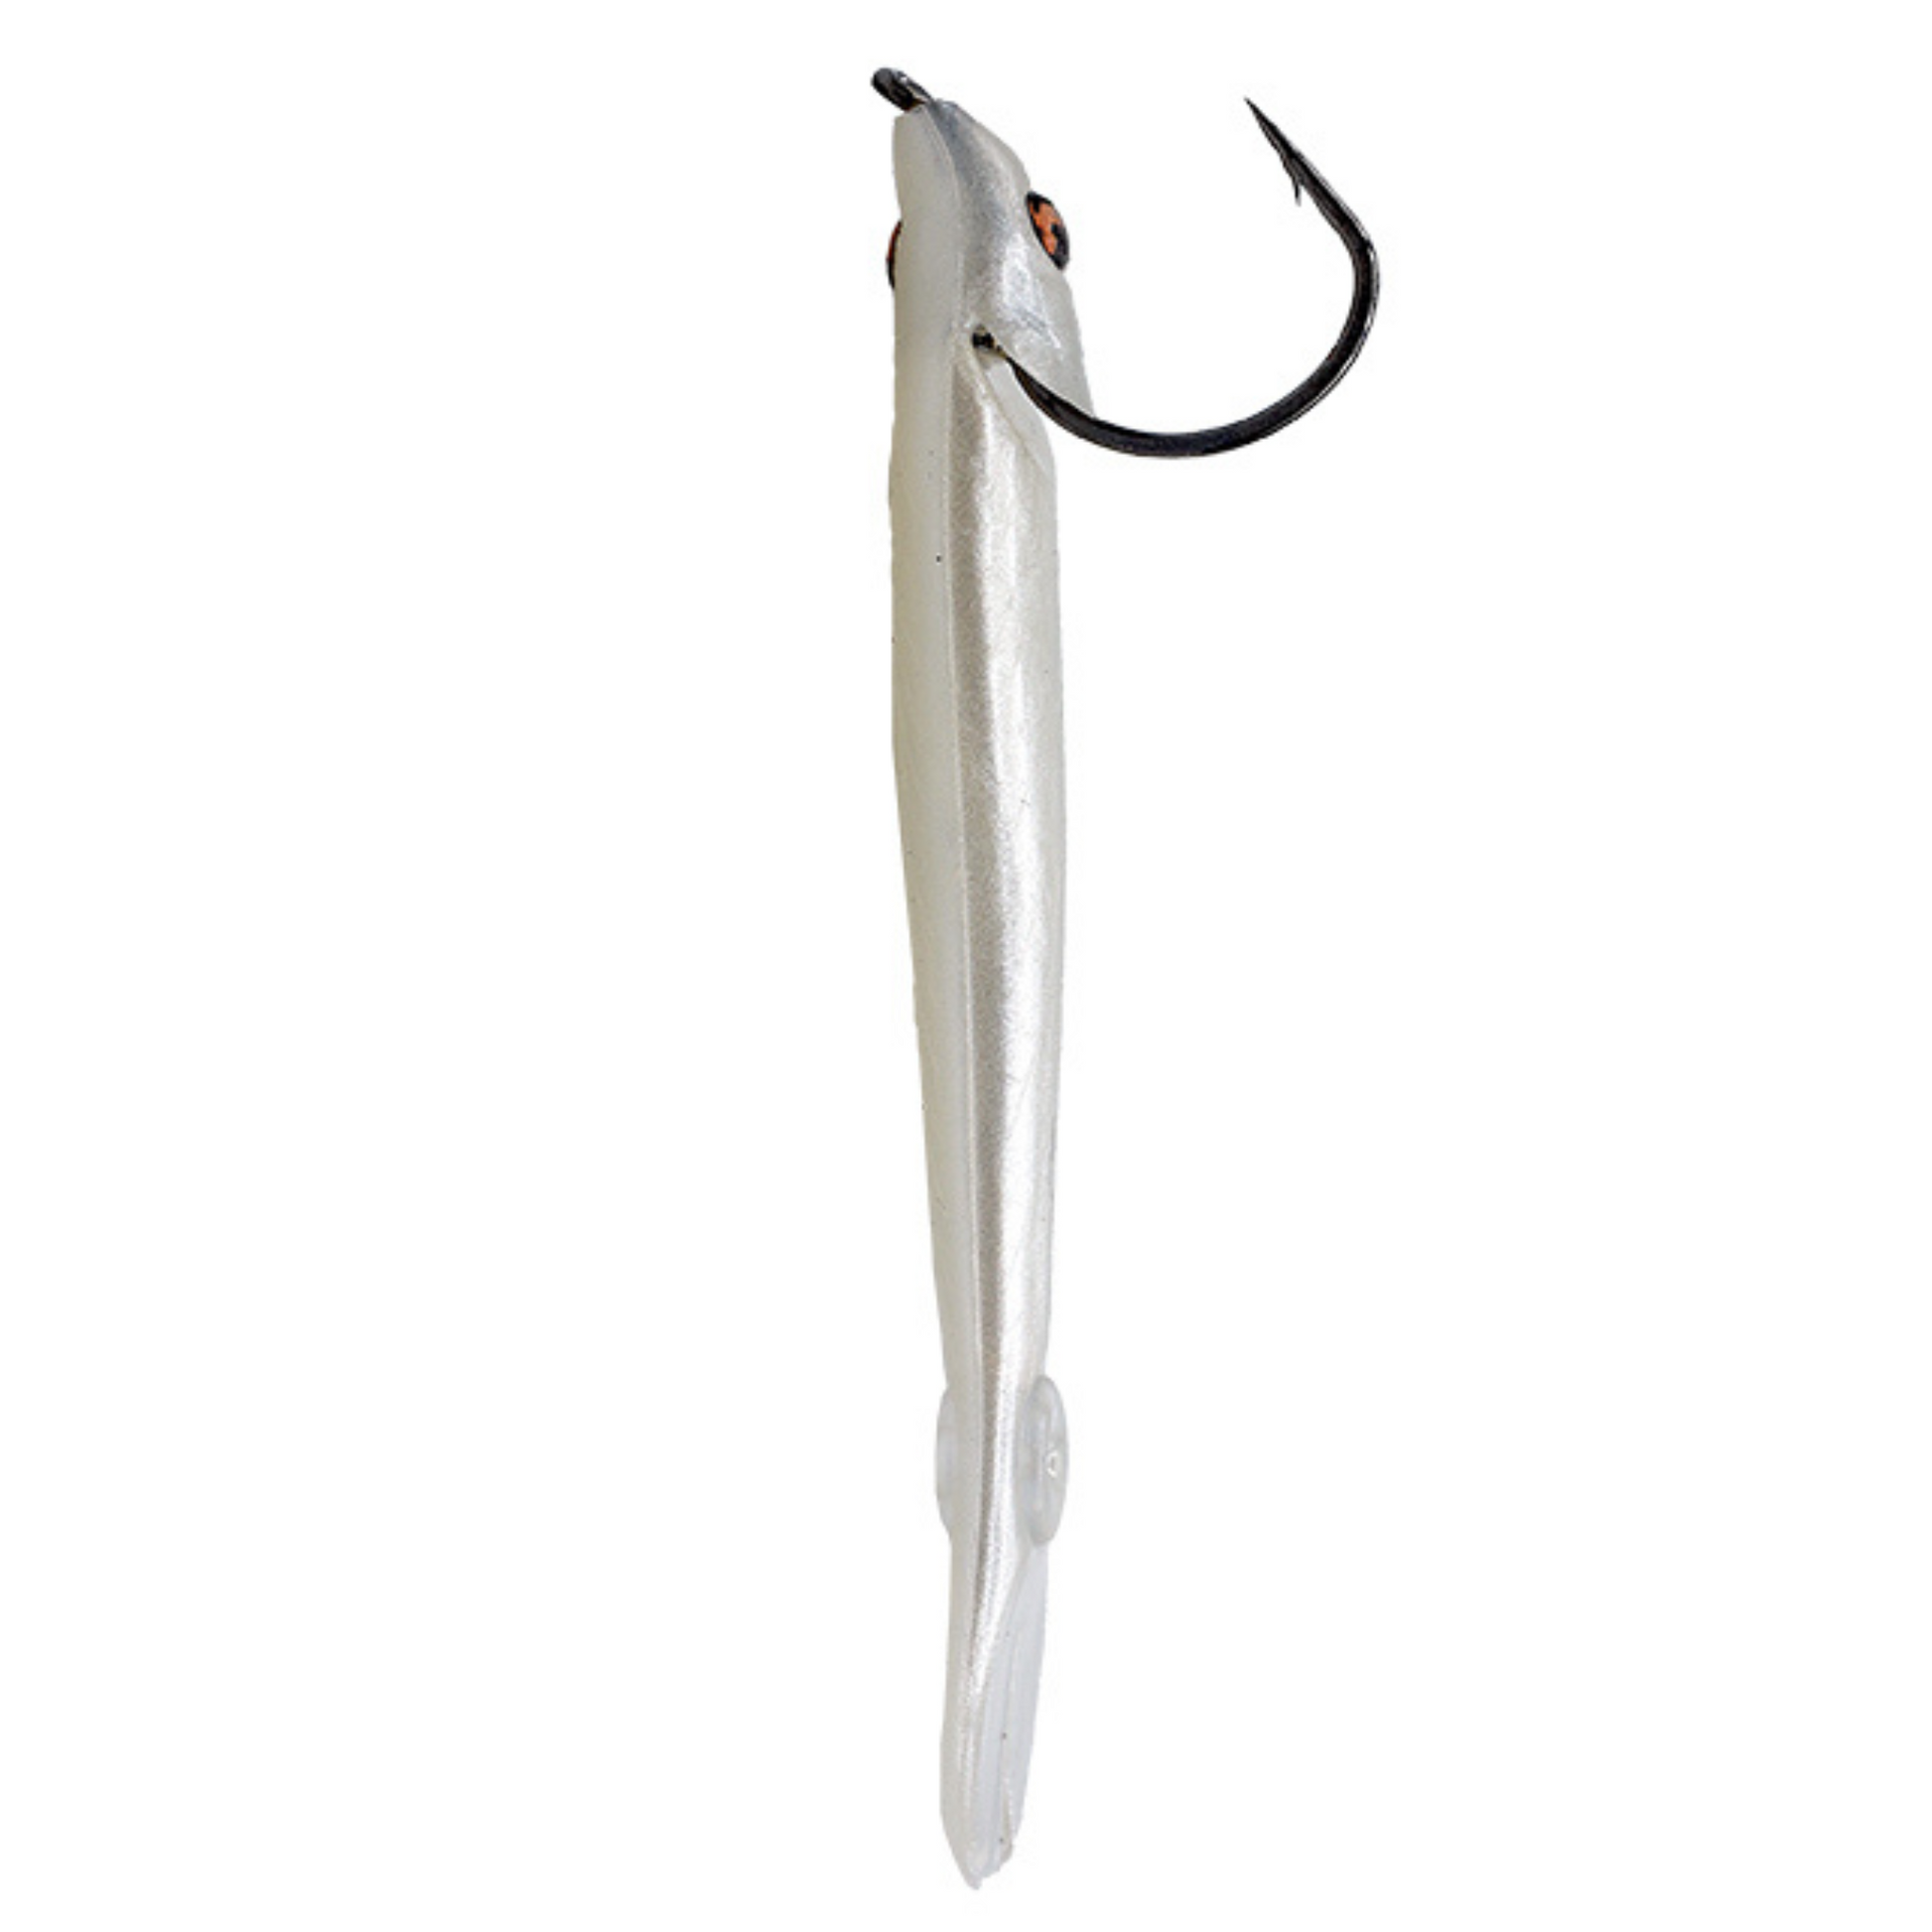 Recoil Minnow 3.25 Bait by Lawless Lures